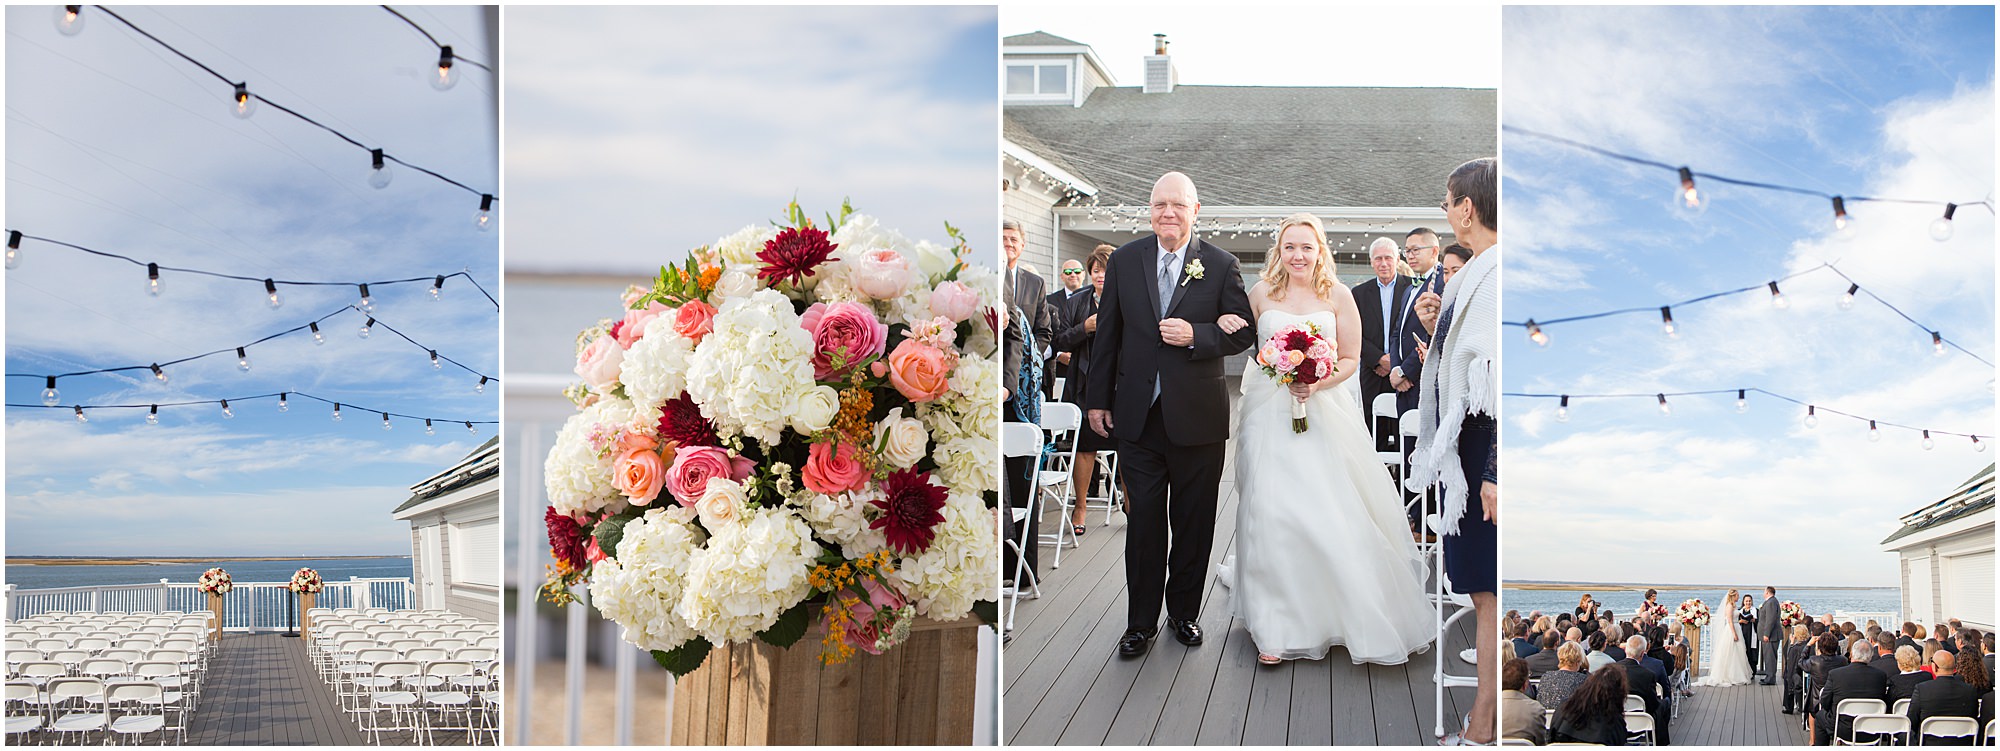 The Best Jersey Shore Wedding Venues, Avalon Yacht Club